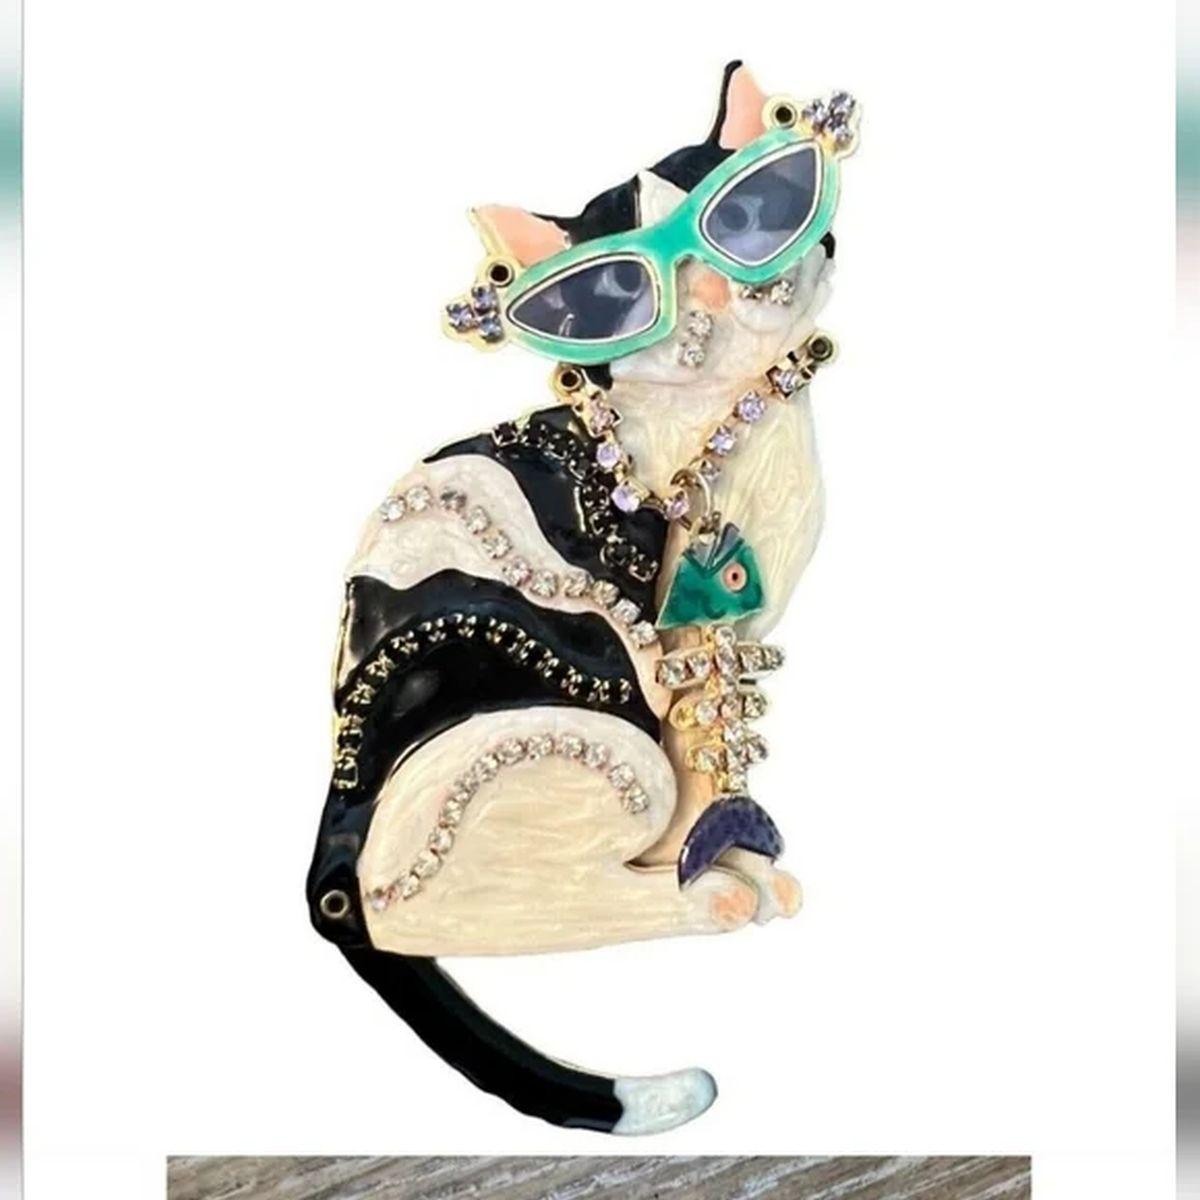 Simply Beautiful! Oscar worthy Iconic LUNCH AT THE RITZ Signed Crystal and Enamel Whimsical Kitty Cat Brooch. The Enamel and Crystal embellished Show Stopper Brooch features a Kitty Cat with a swinging tail and wearing Sunglasses. What Fun! Gold